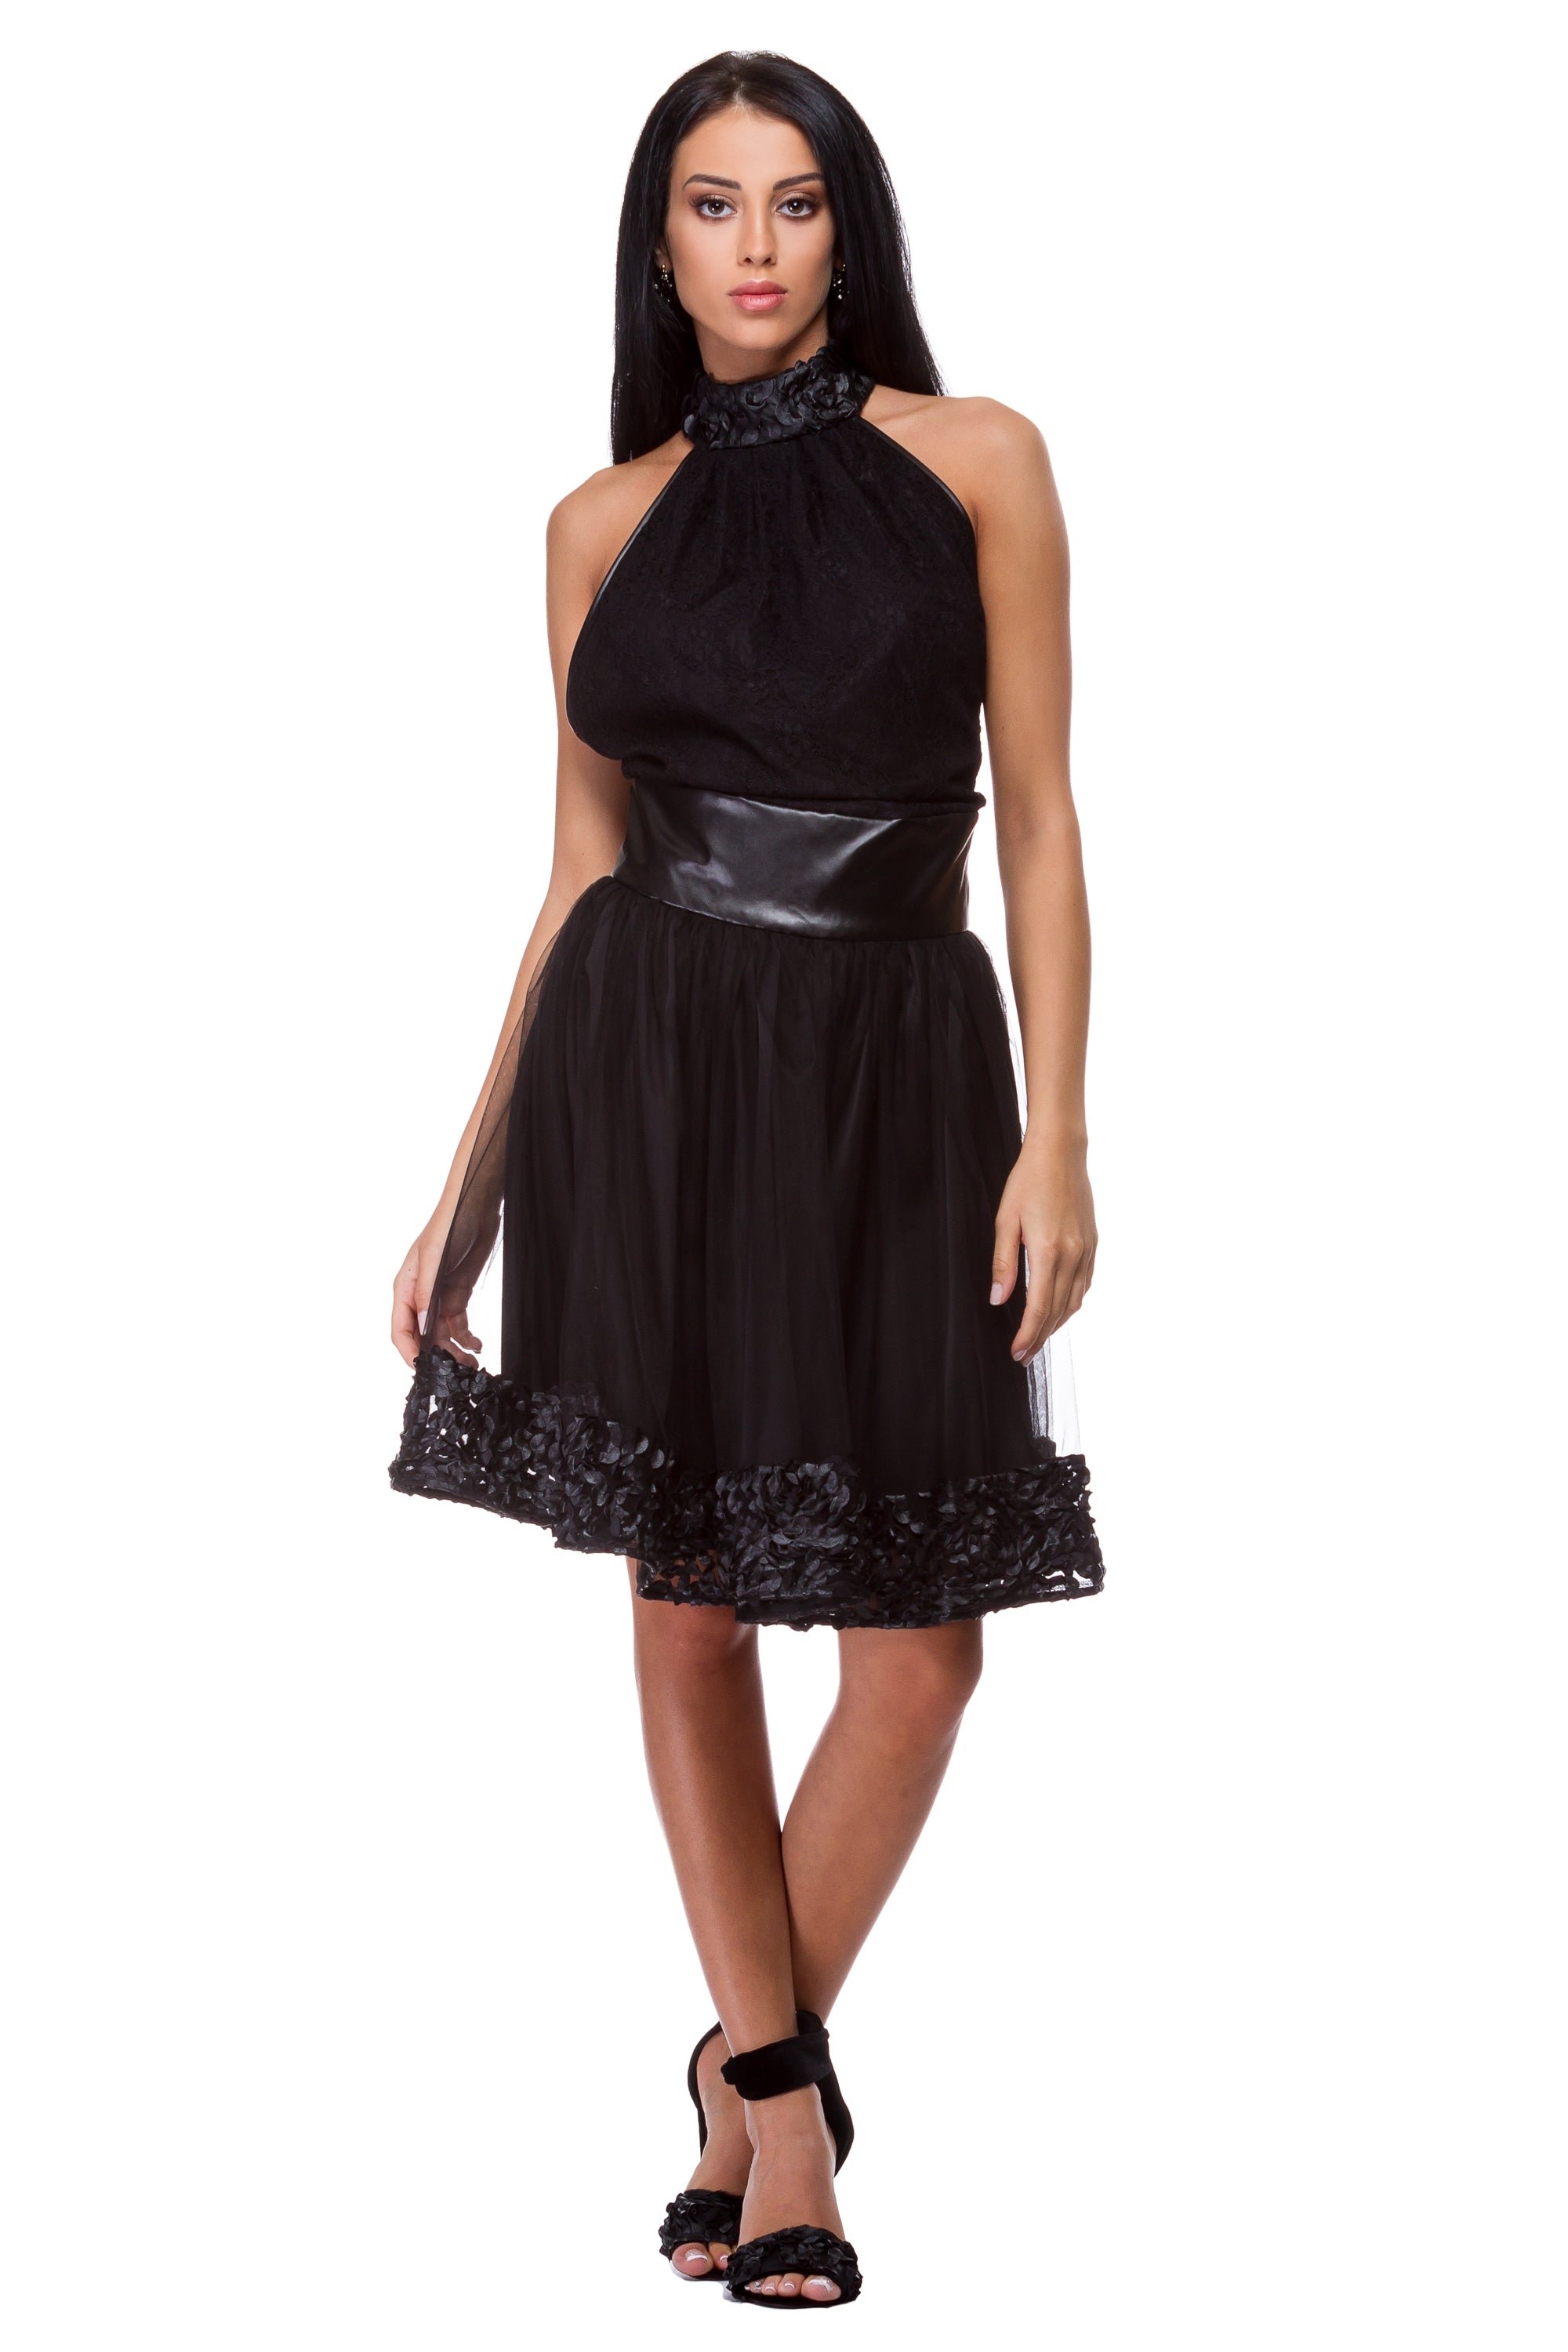 Open back black dress with leather flowers decoration WDR-0004